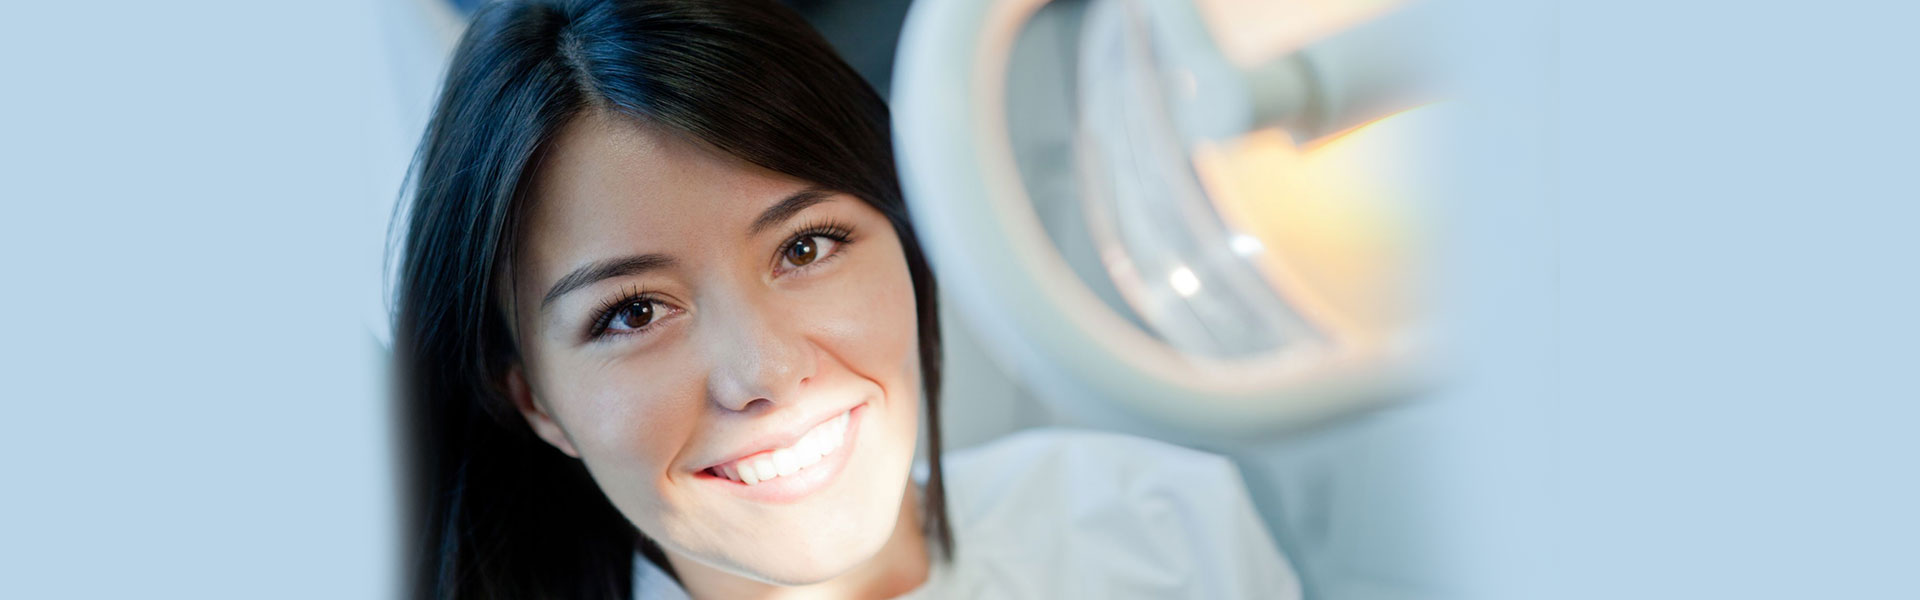 Root Canal Treatment in Columbia, SC